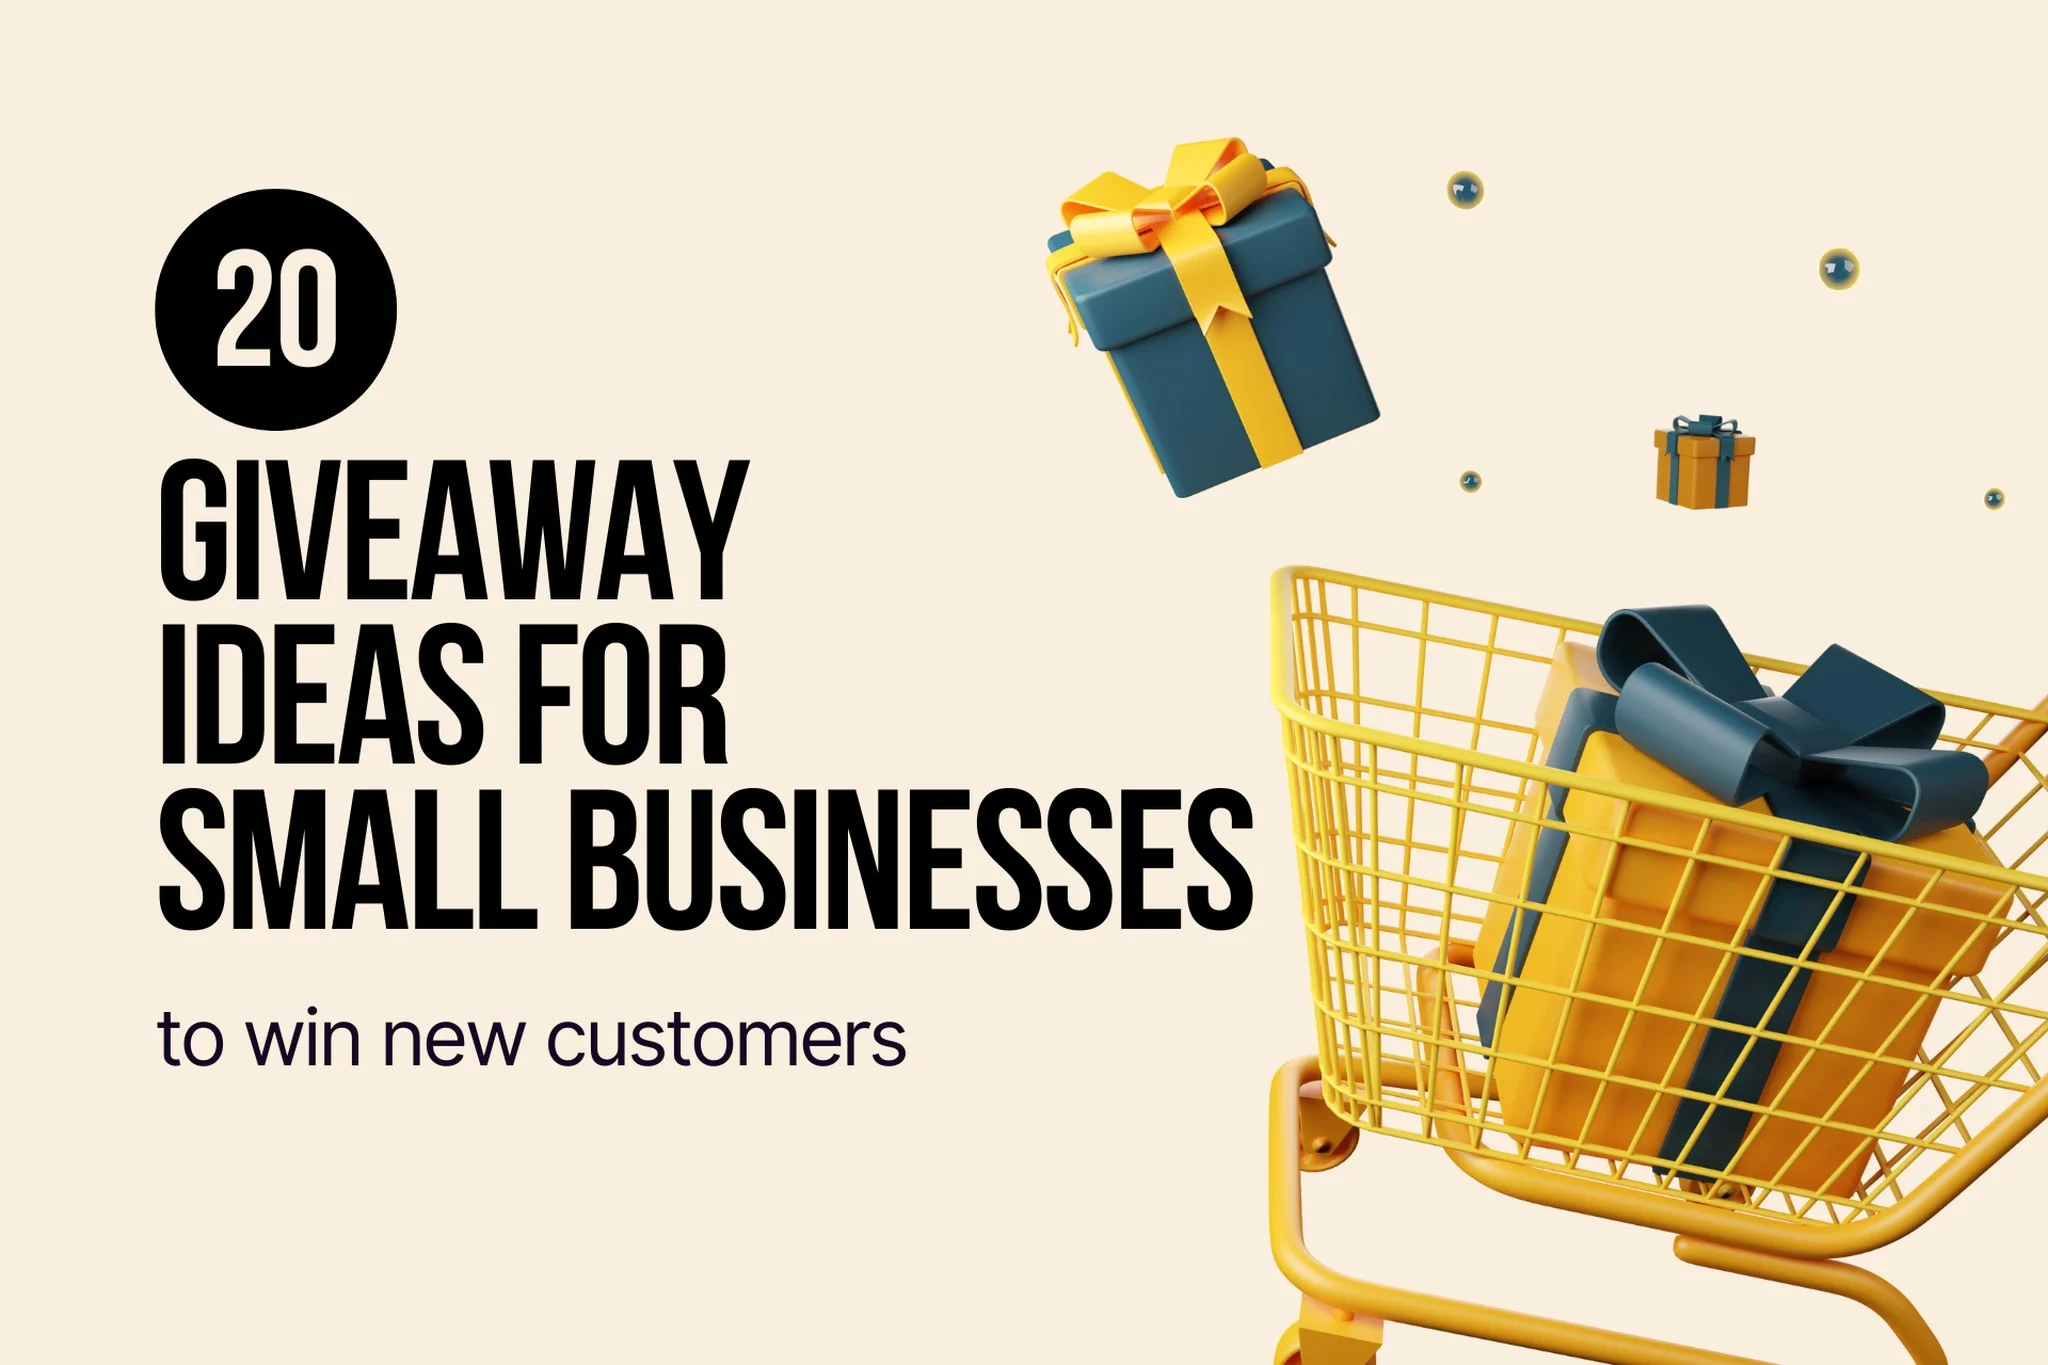 20 Giveaway Ideas for Small Businesses to Win New Customers